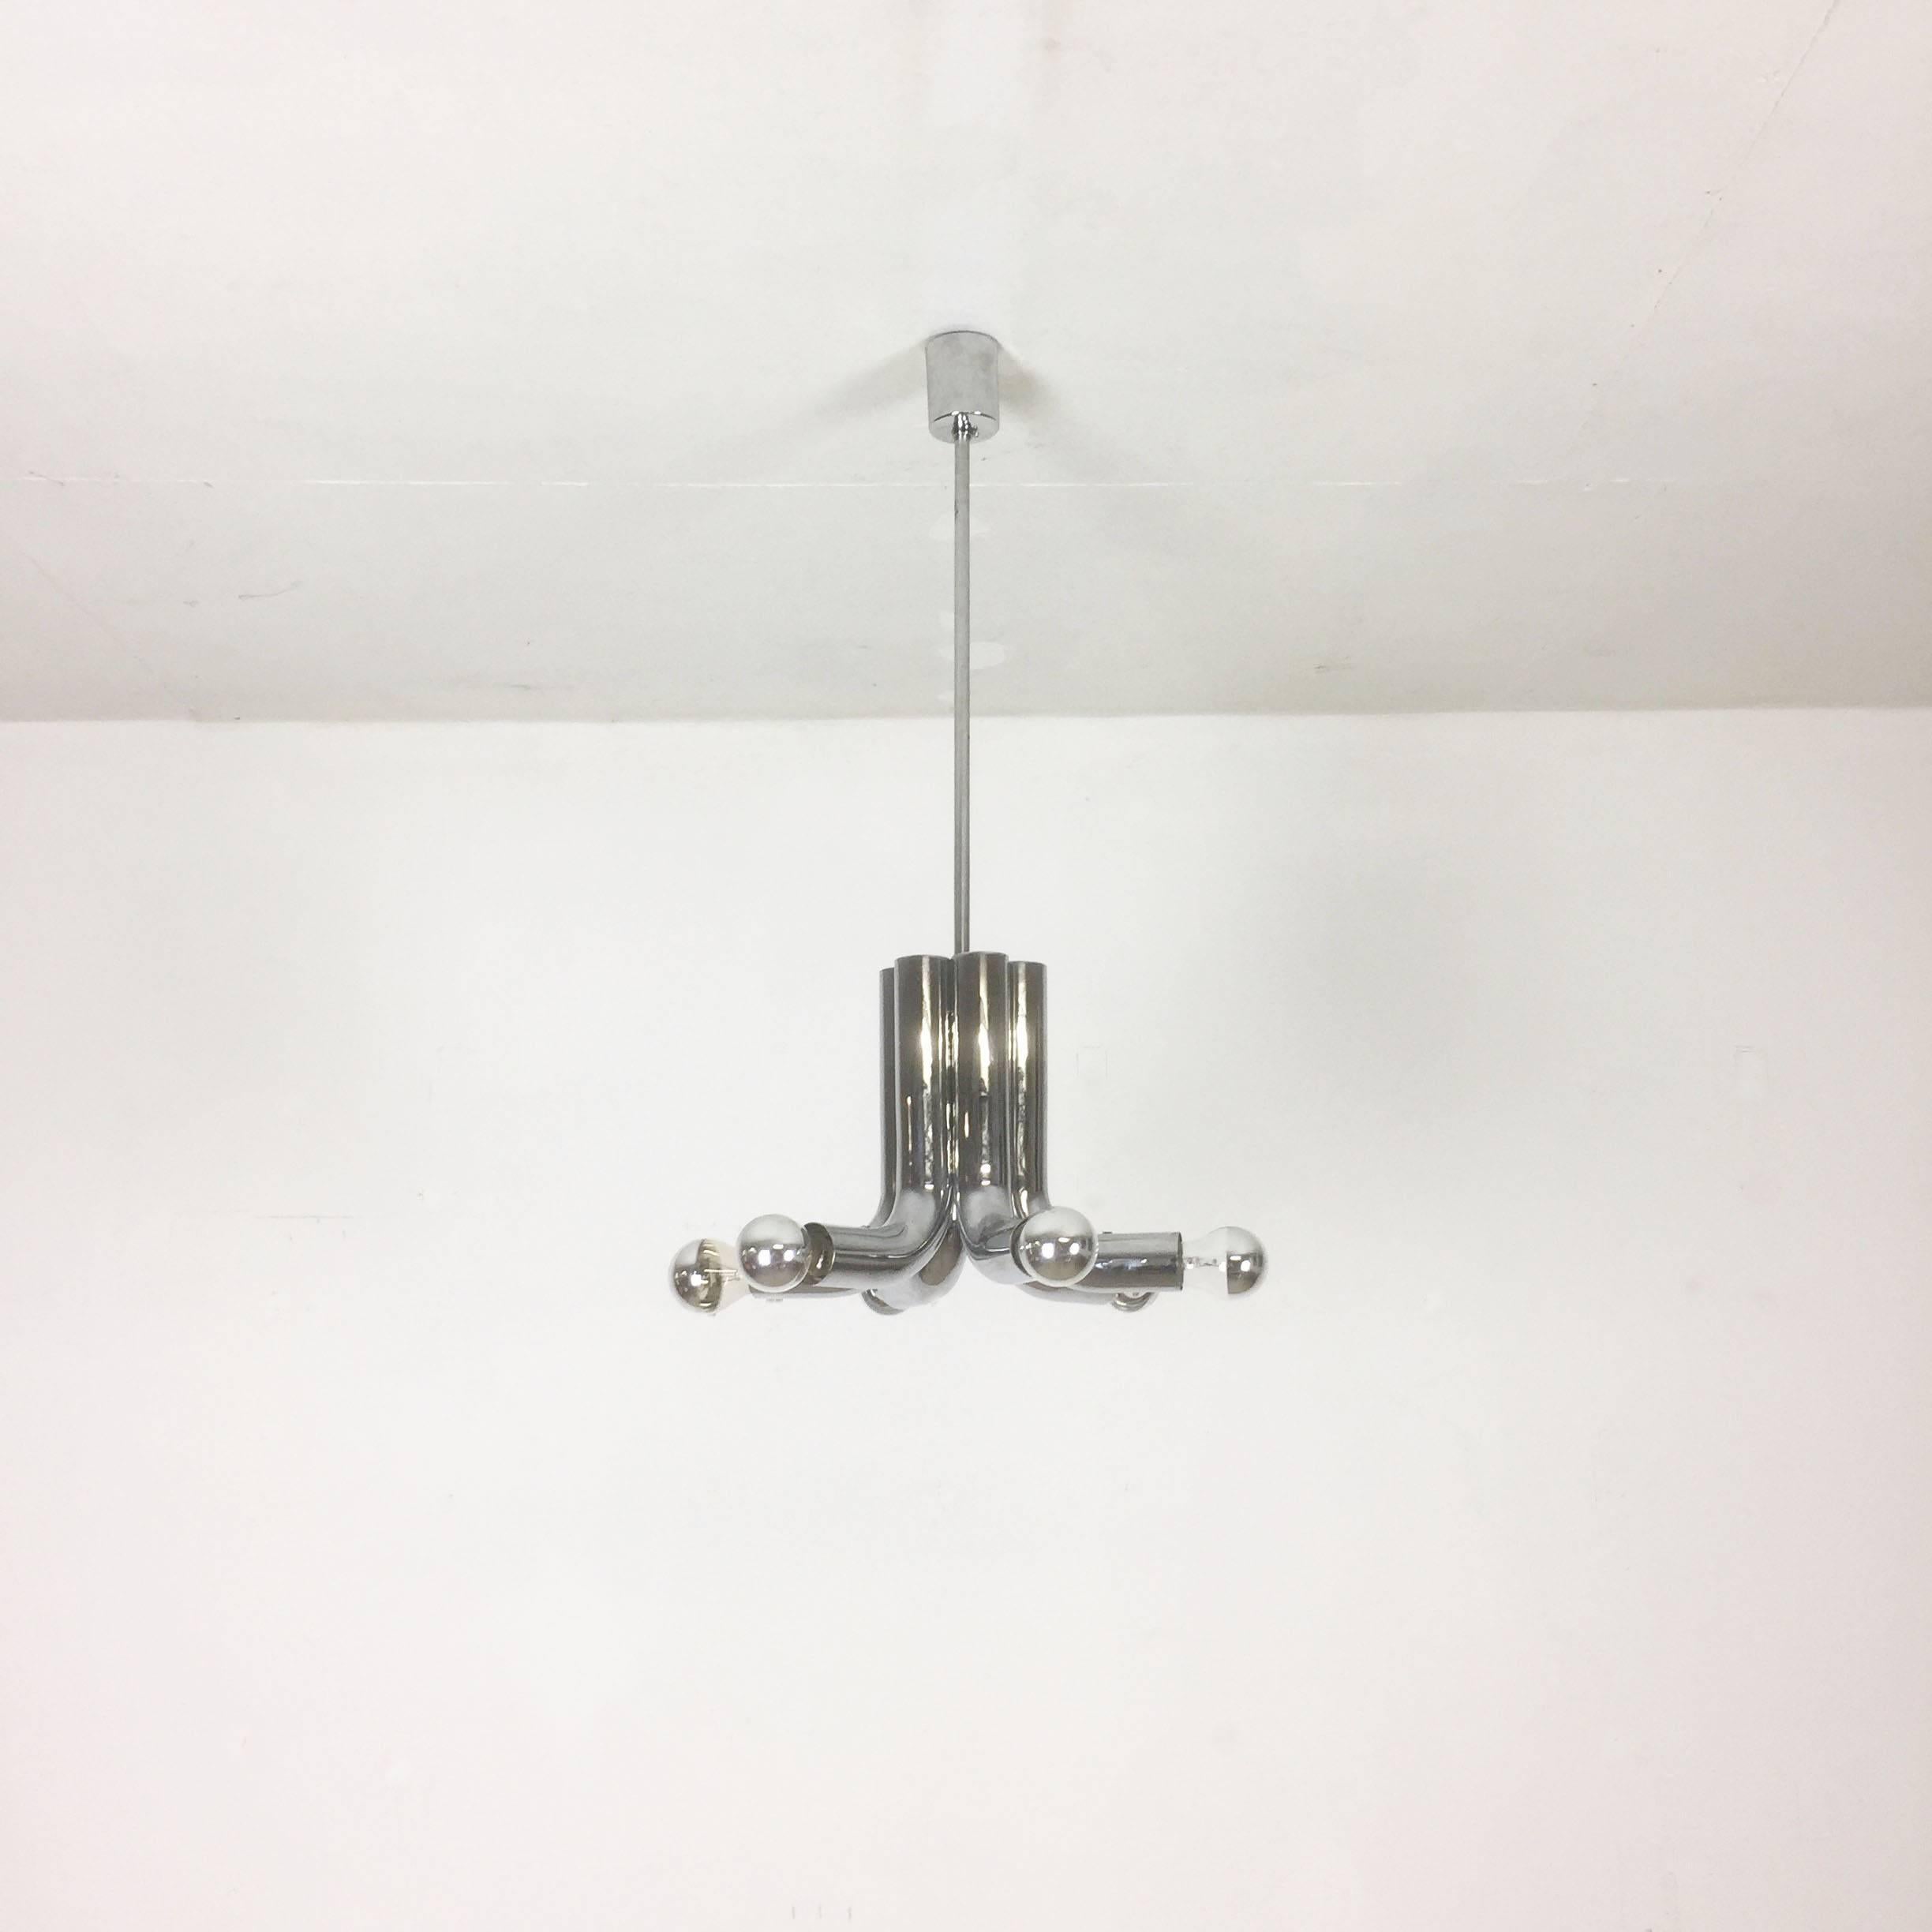 Article:

Sputnik hanging light


Producer:

Cosack lights, Germany


Origin:

Germany



Age:

1960s




Description:


This 1960s, hanging light was made by Cosack lights in Germany. The light is made of solid metal in